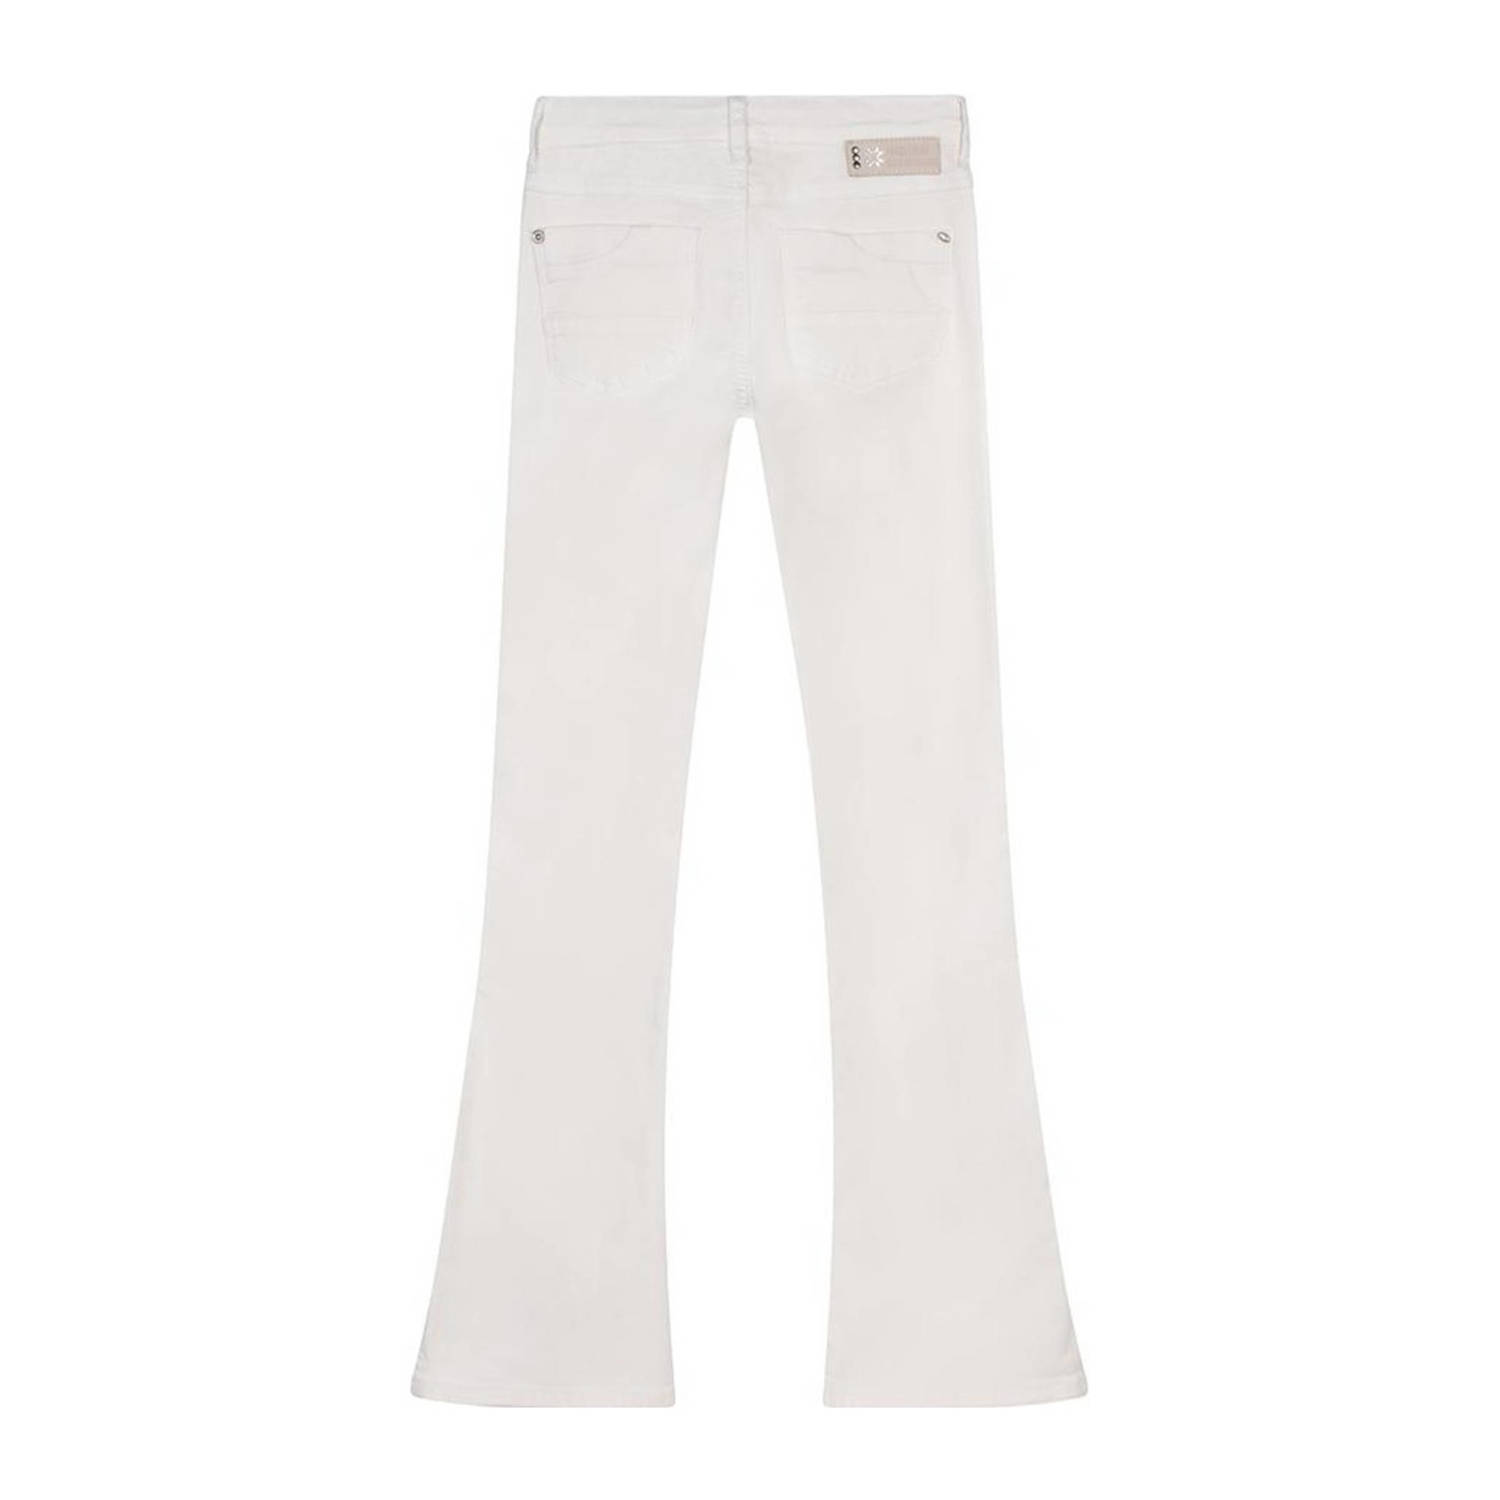 Indian Blue Jeans bootcut jeans Lexi white